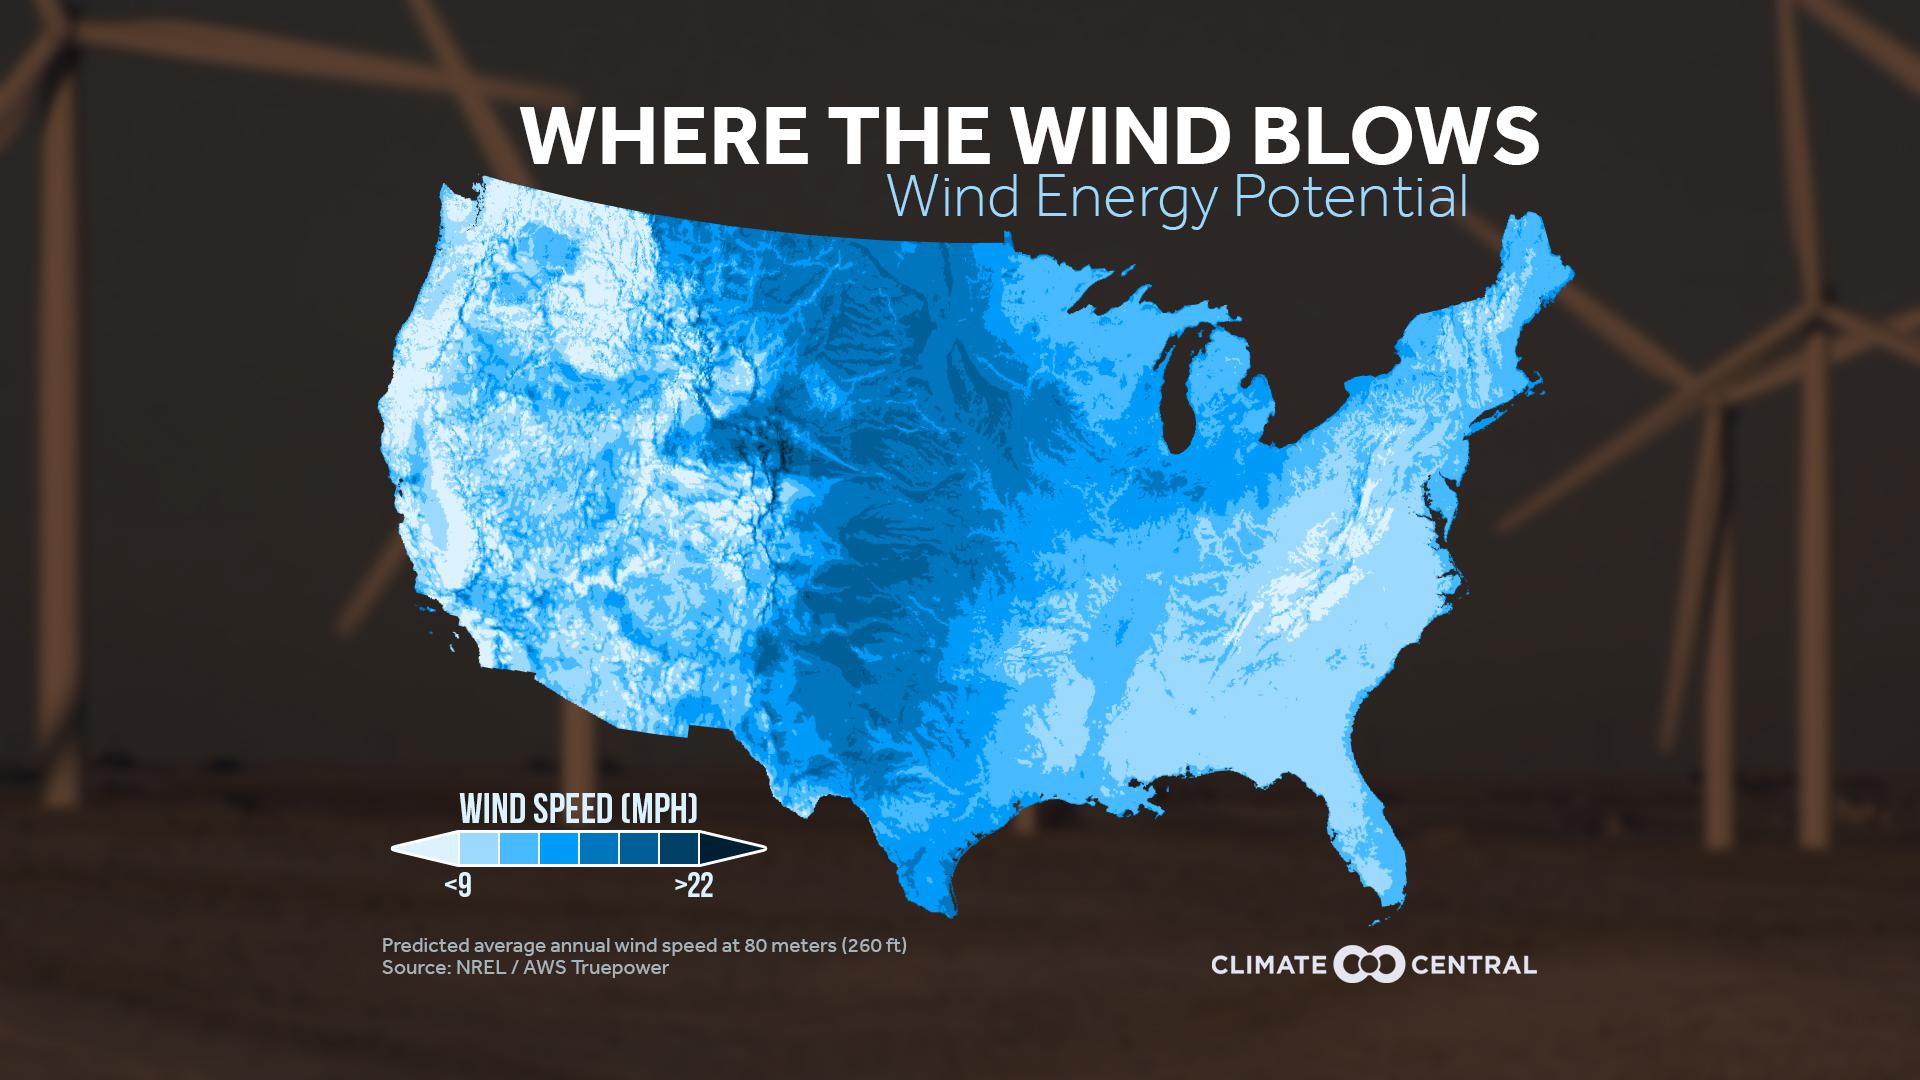 Set 1 - Wind Energy Potential